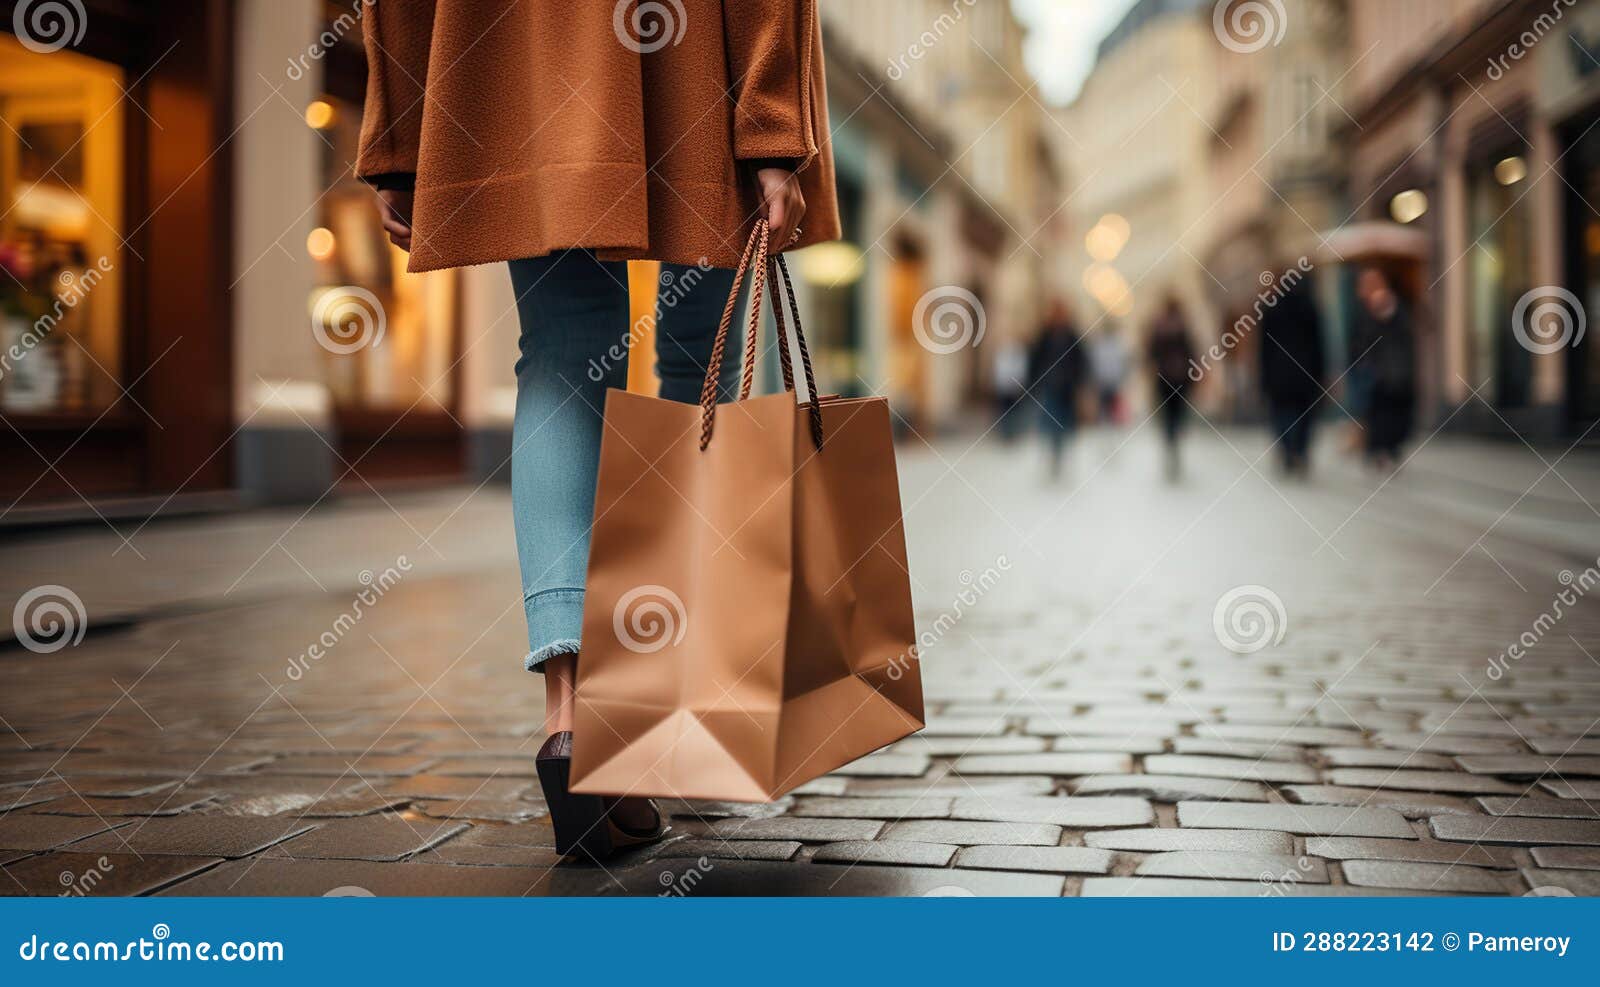 woman`s hand holding shopping bags while walking on the street